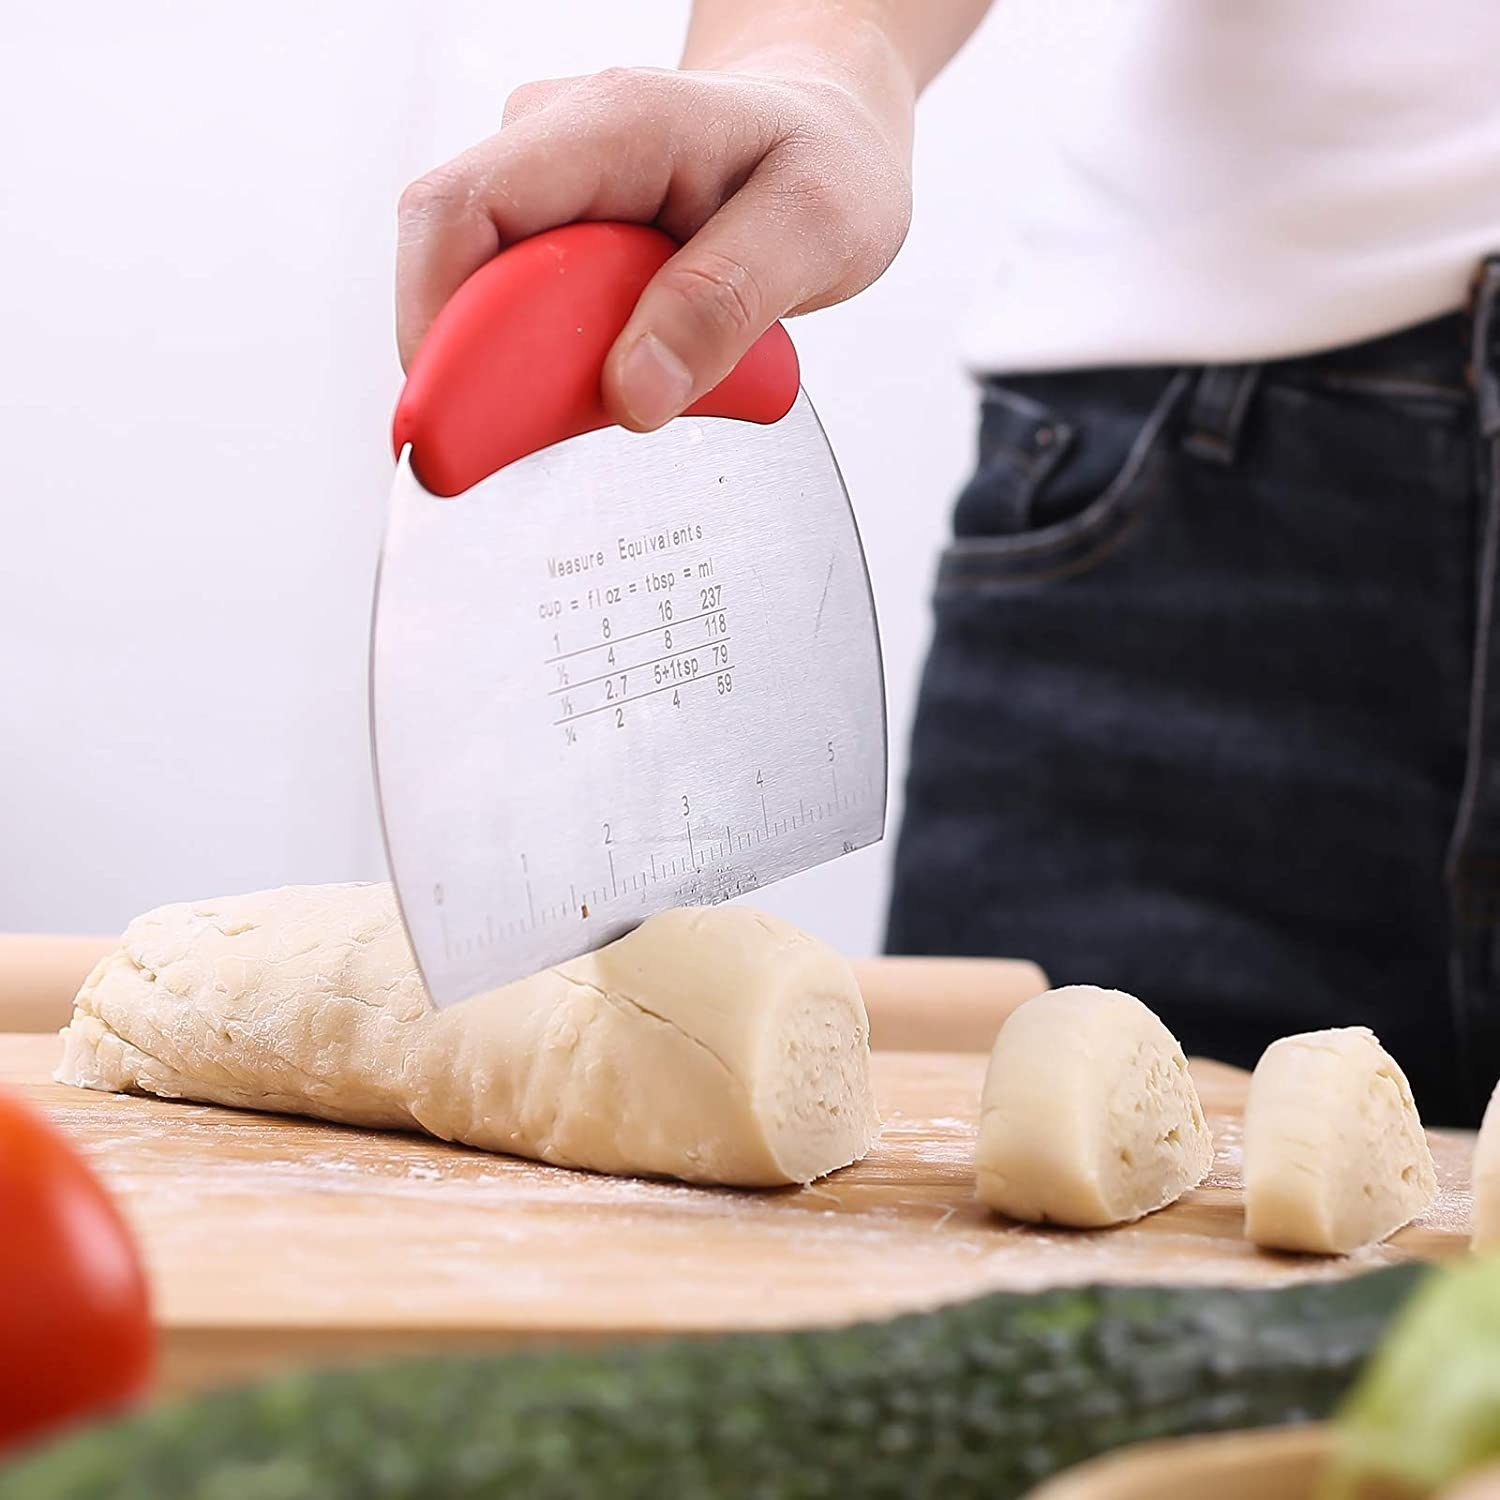 A person cutting dough with the tool